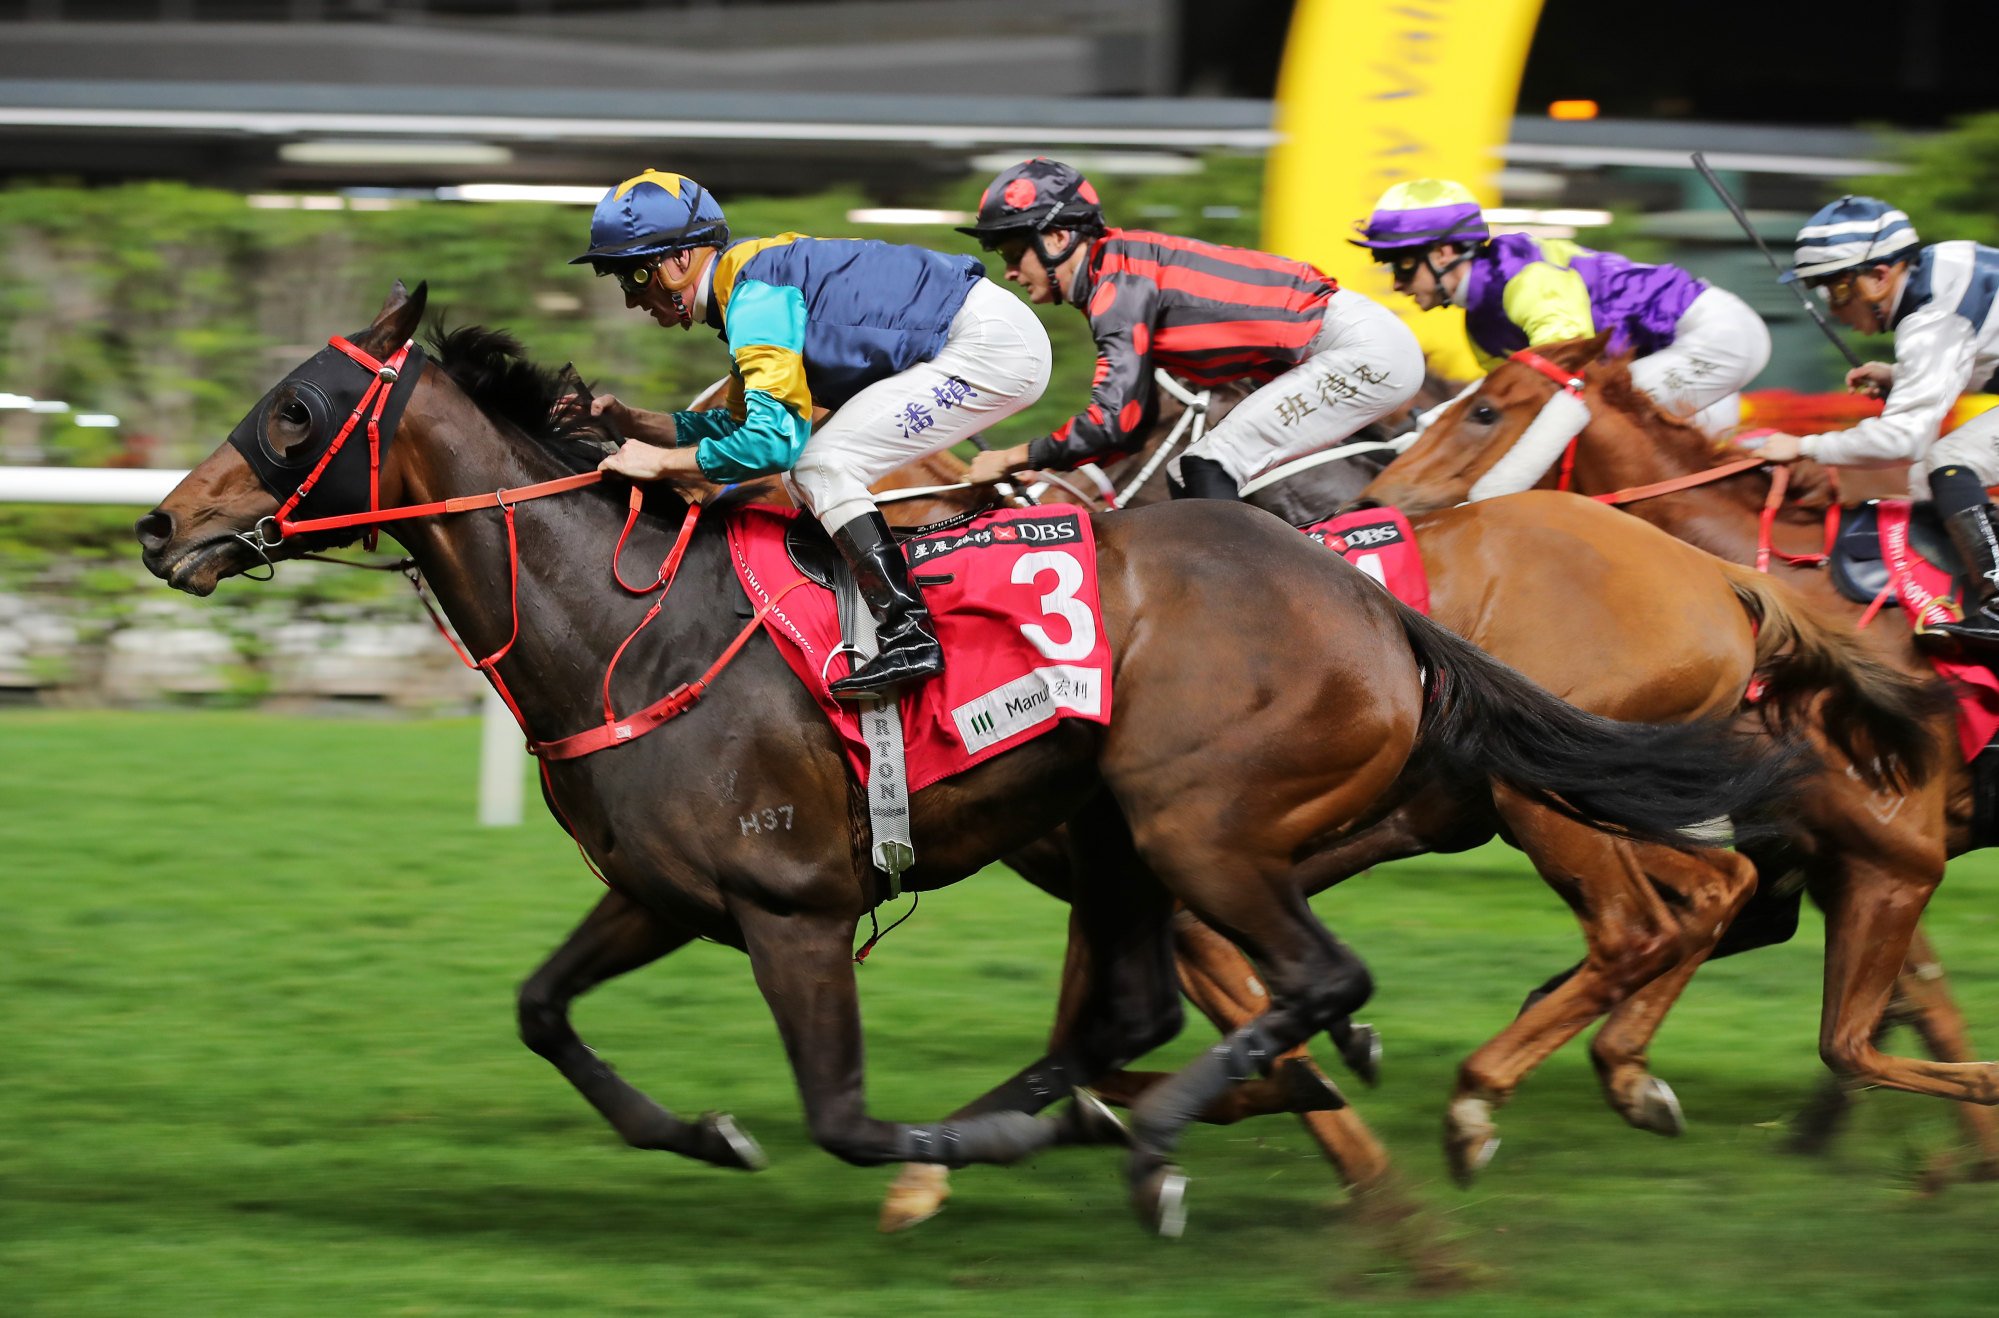 A Americ Te Specso storms home to win at Happy Valley last start.